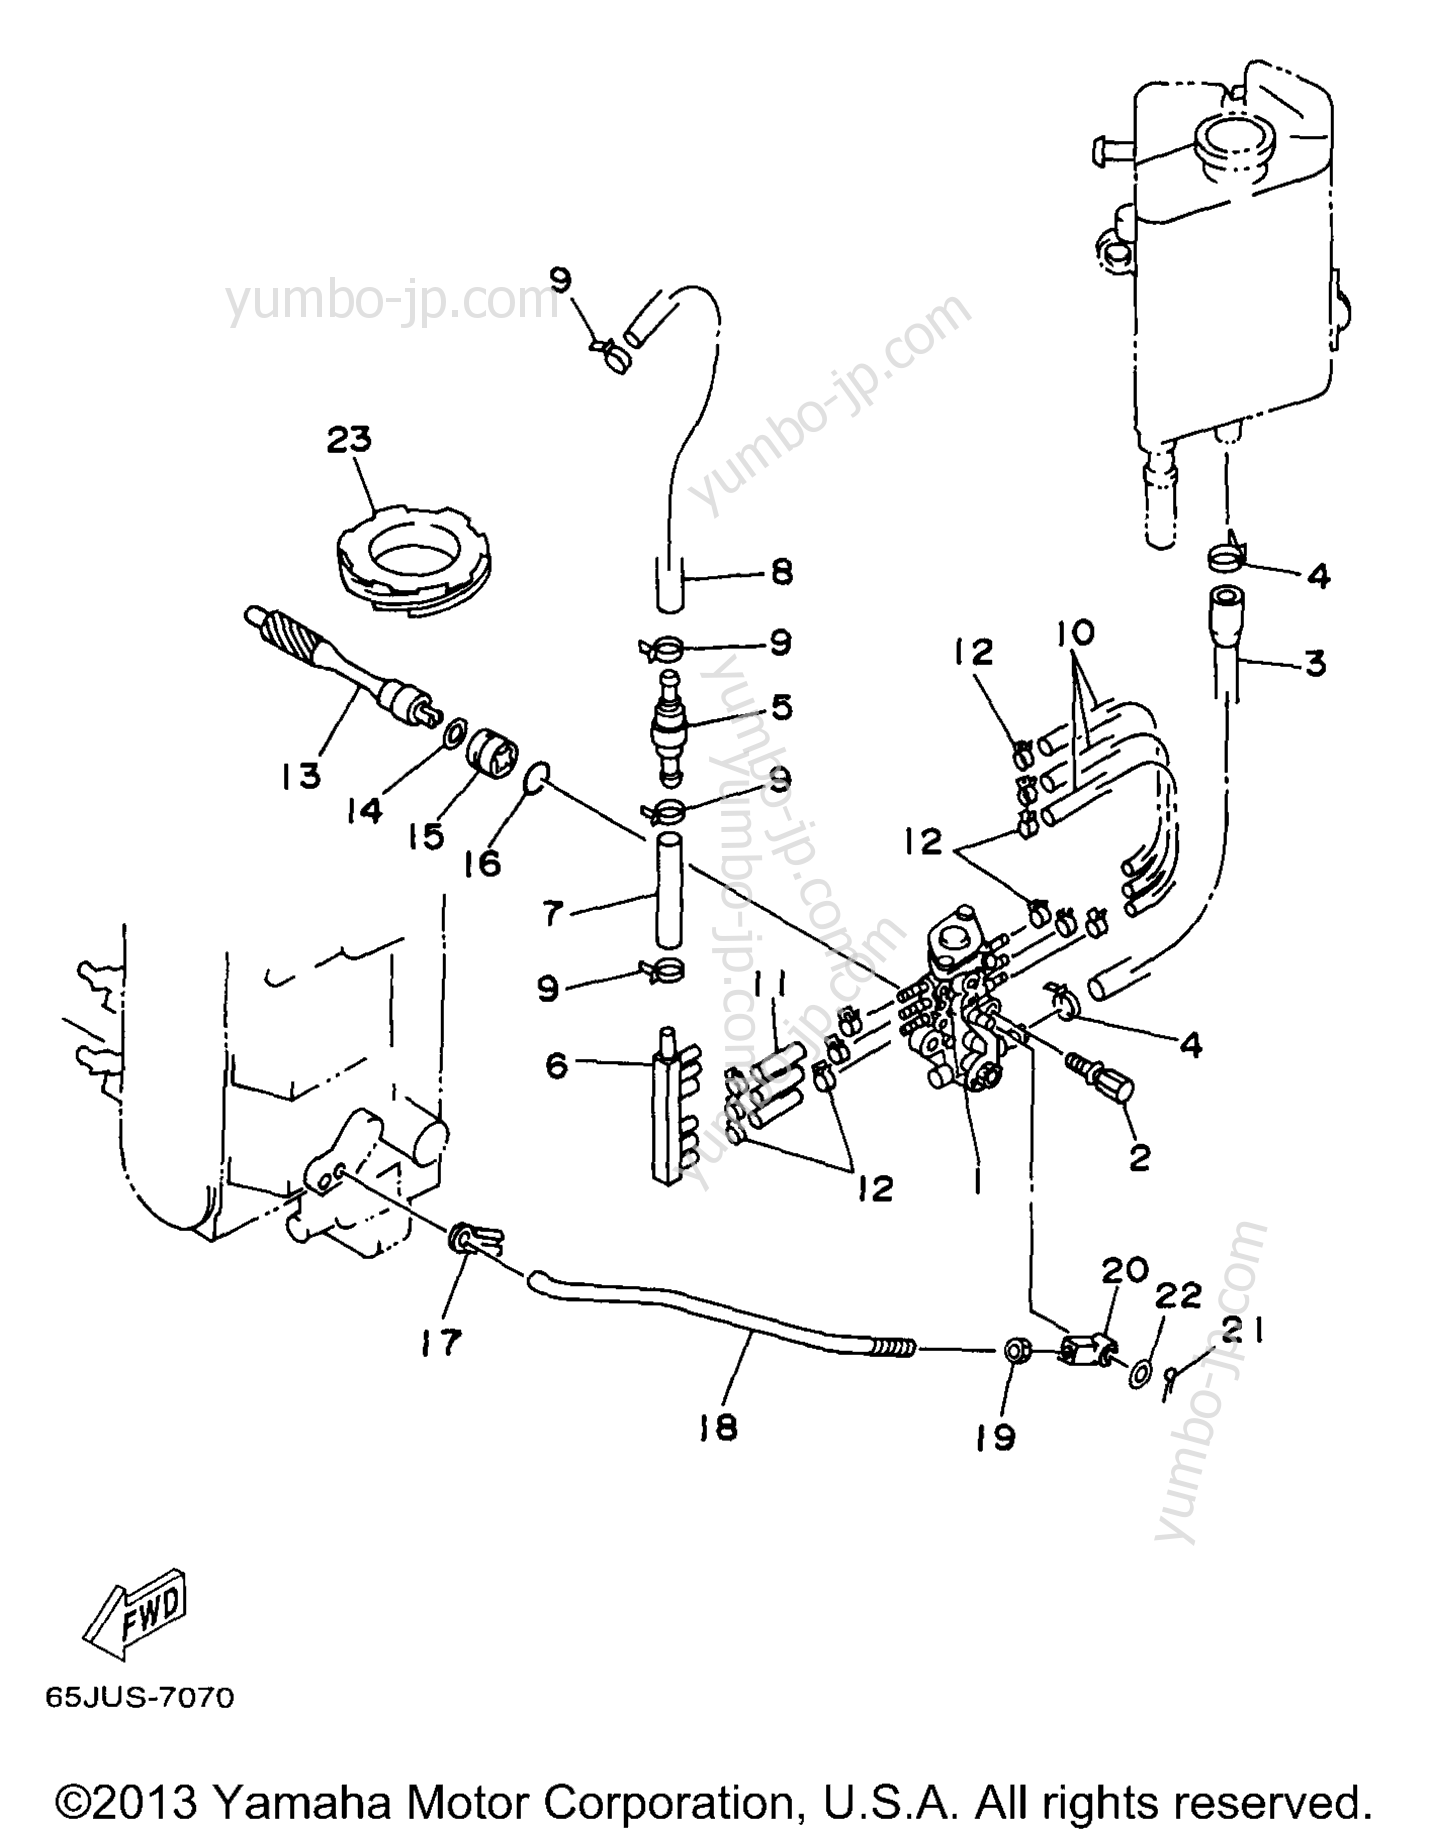 OIL PUMP for outboards YAMAHA L225TXRV 1997 year